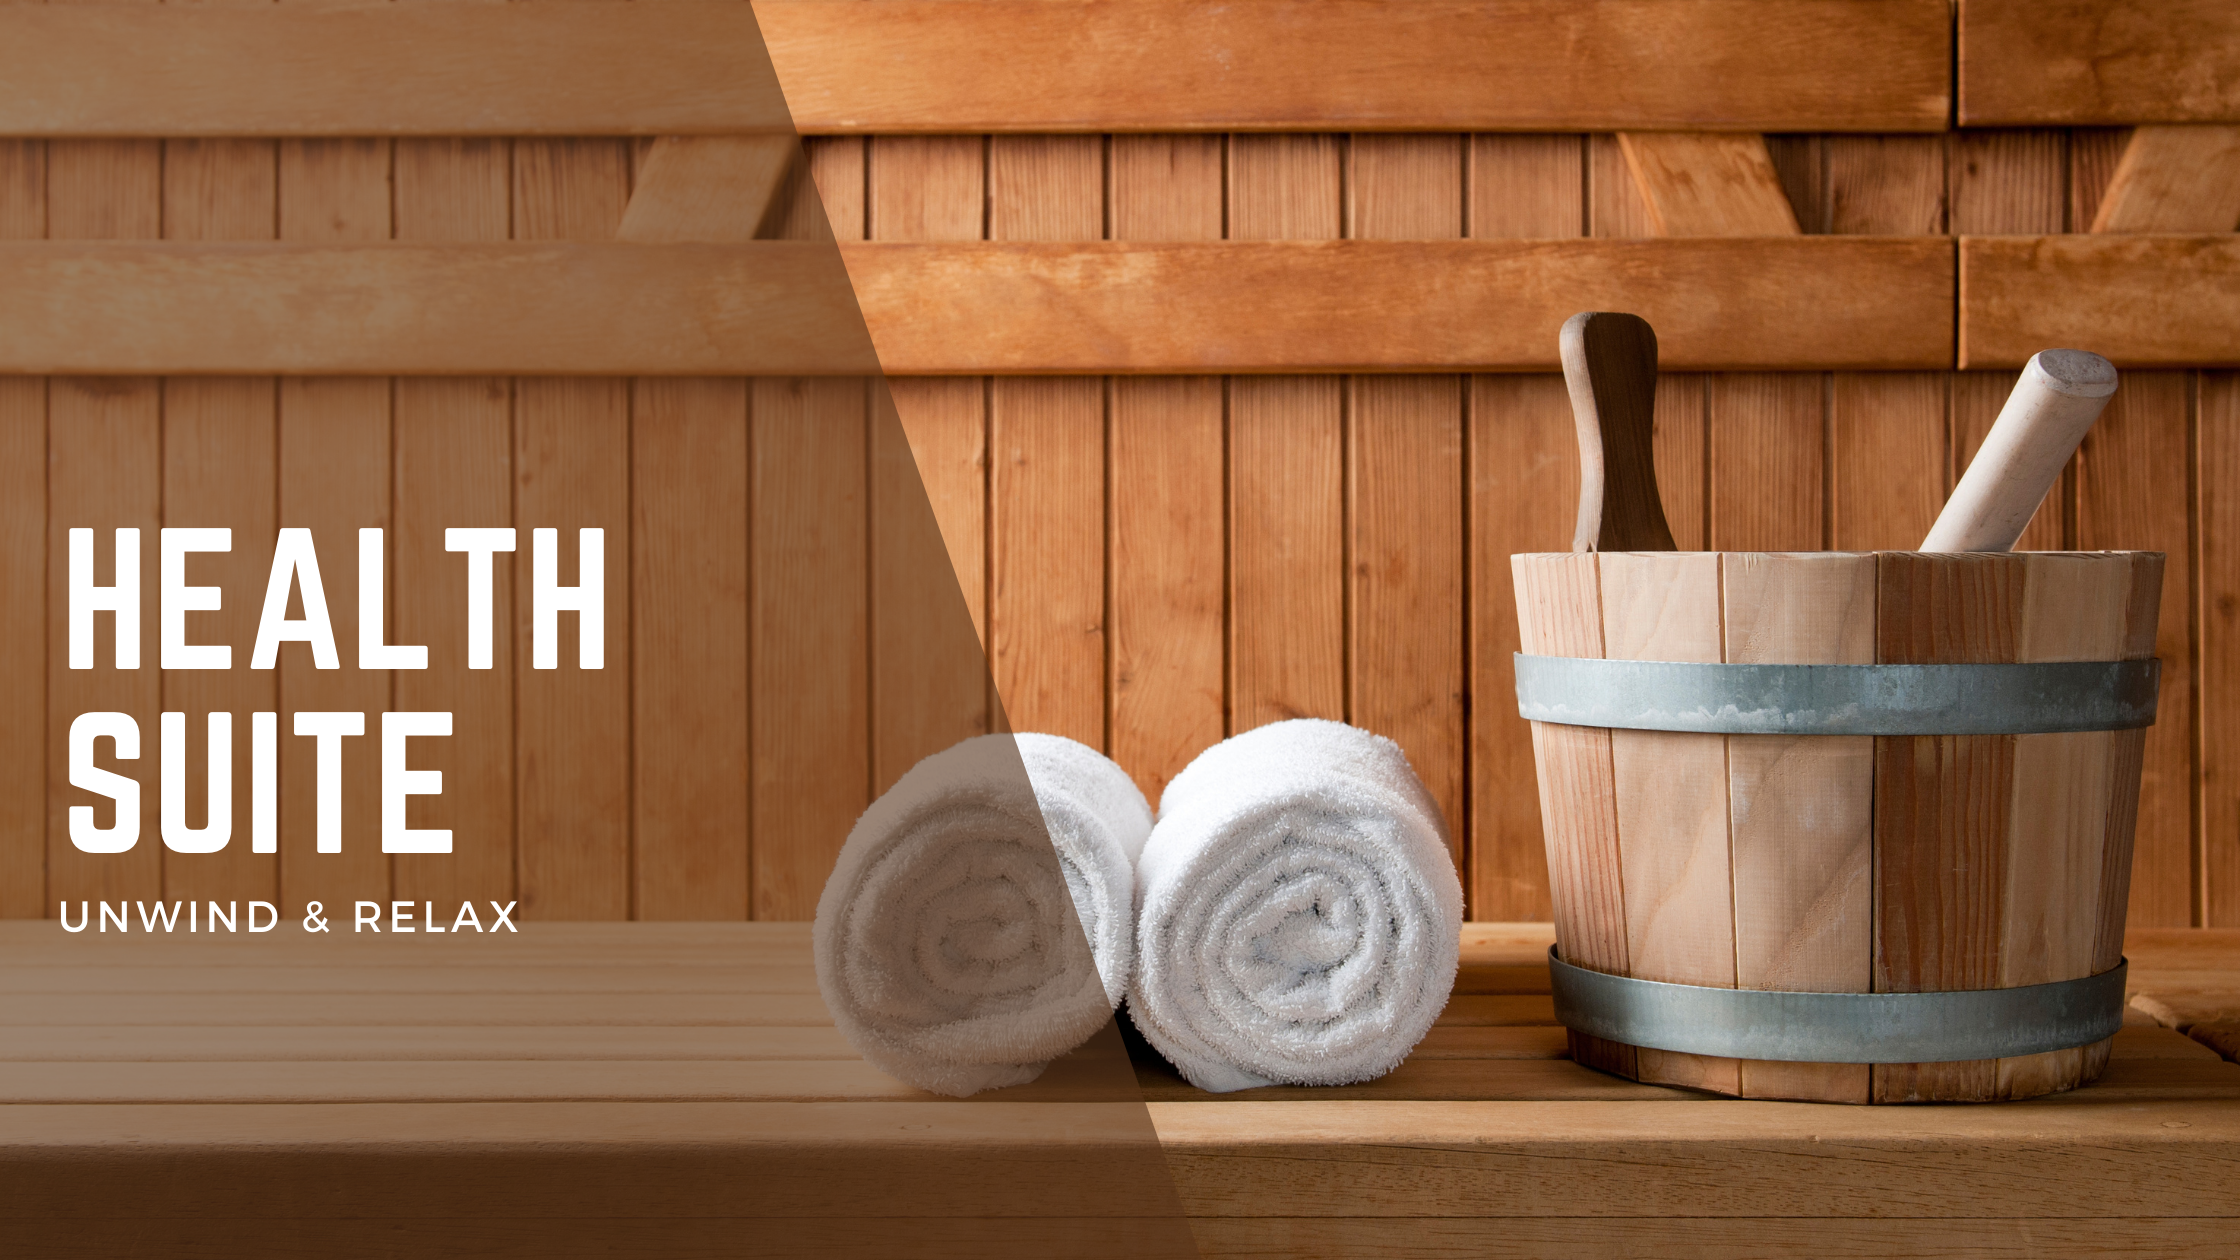 White Towels and a wooden water bucket in the sauna - Health suite membership